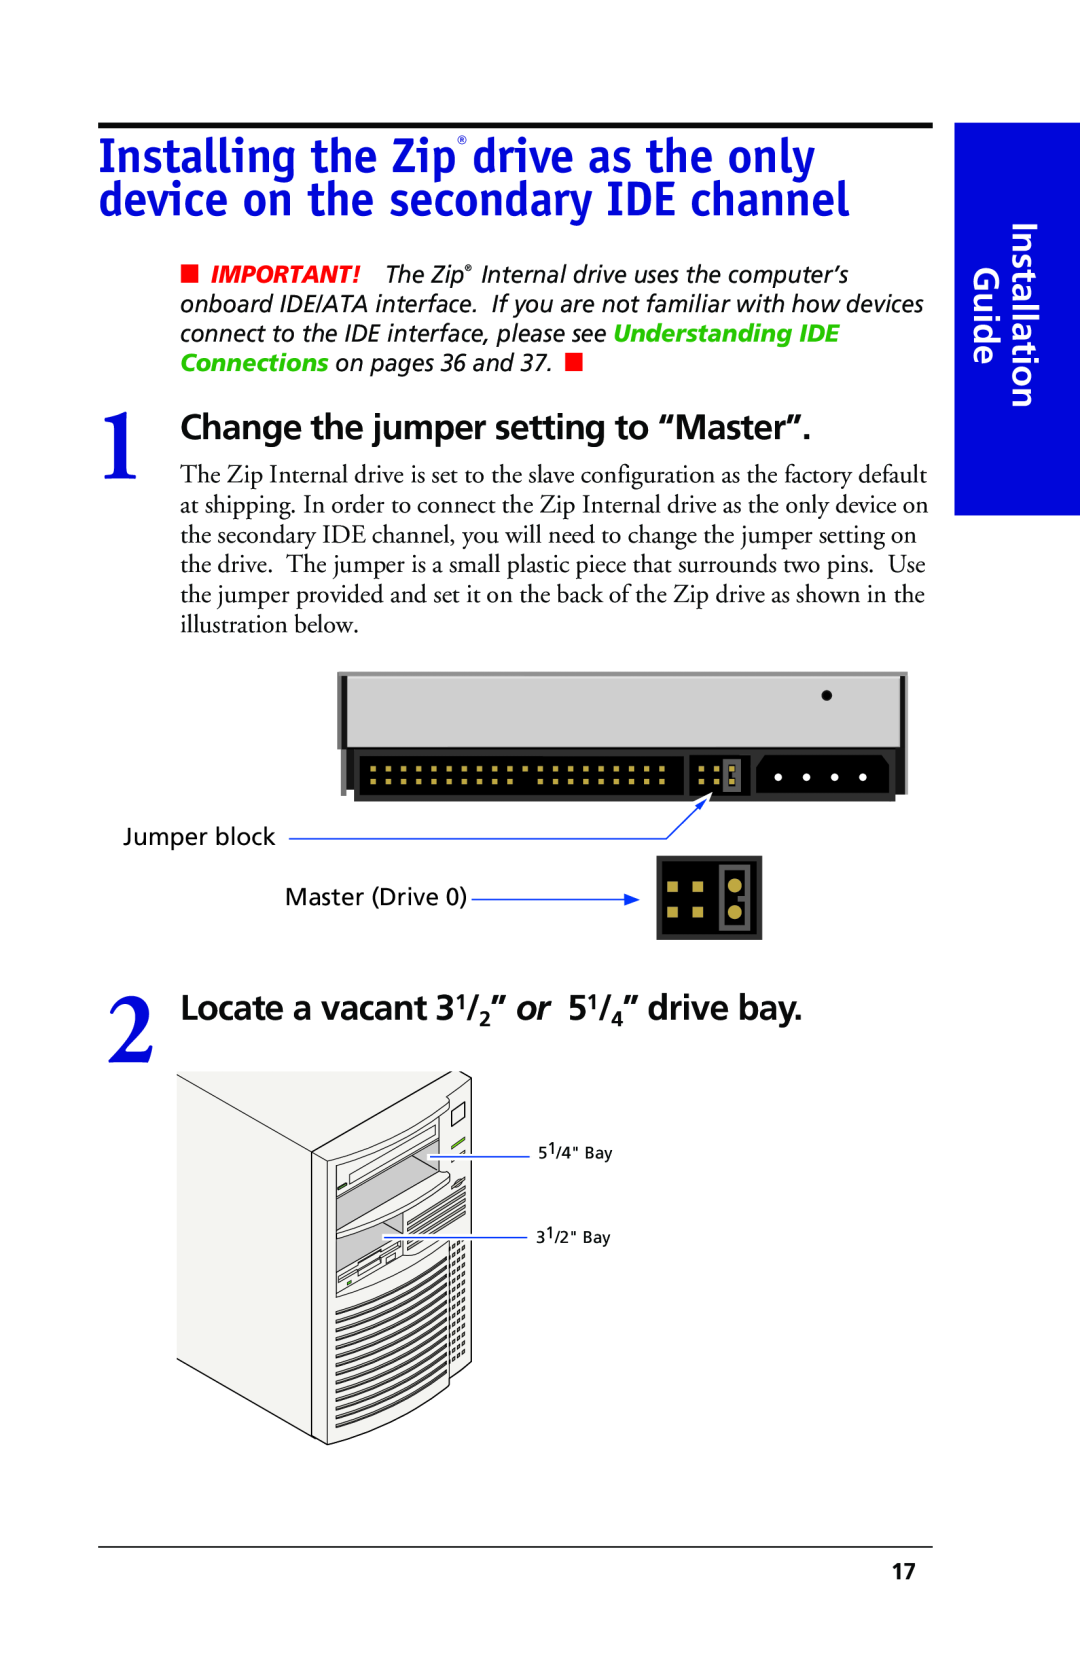 Iomega 03798300 Change the jumper setting to “Master”, Locate a vacant 31/2” or 51/4” drive bay, Installation Guide 